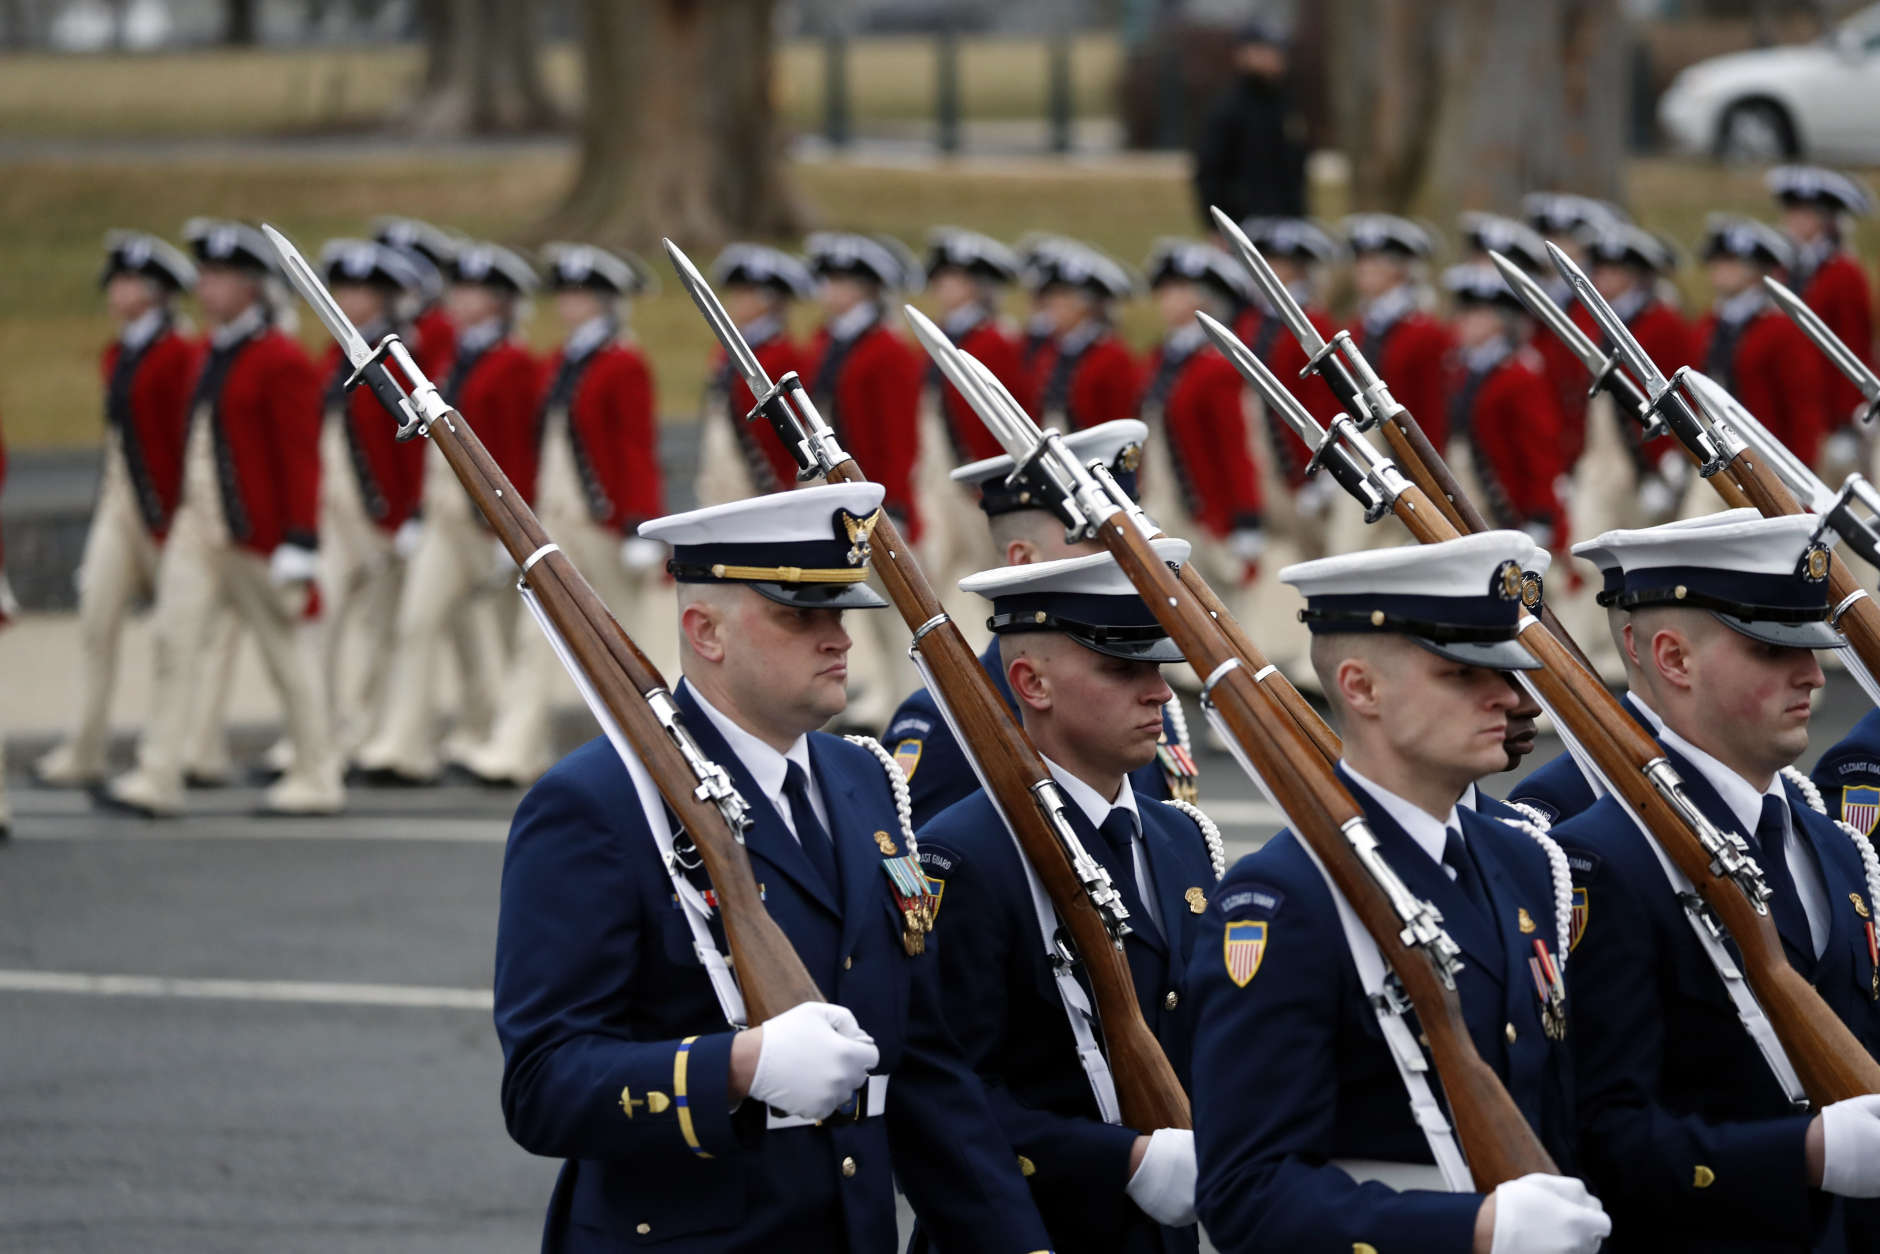 Military units march in the inaugural parade from the U.S. Capitol, Friday, Jan. 20, 2017, in Washington. (AP Photo/Alex Brandon)